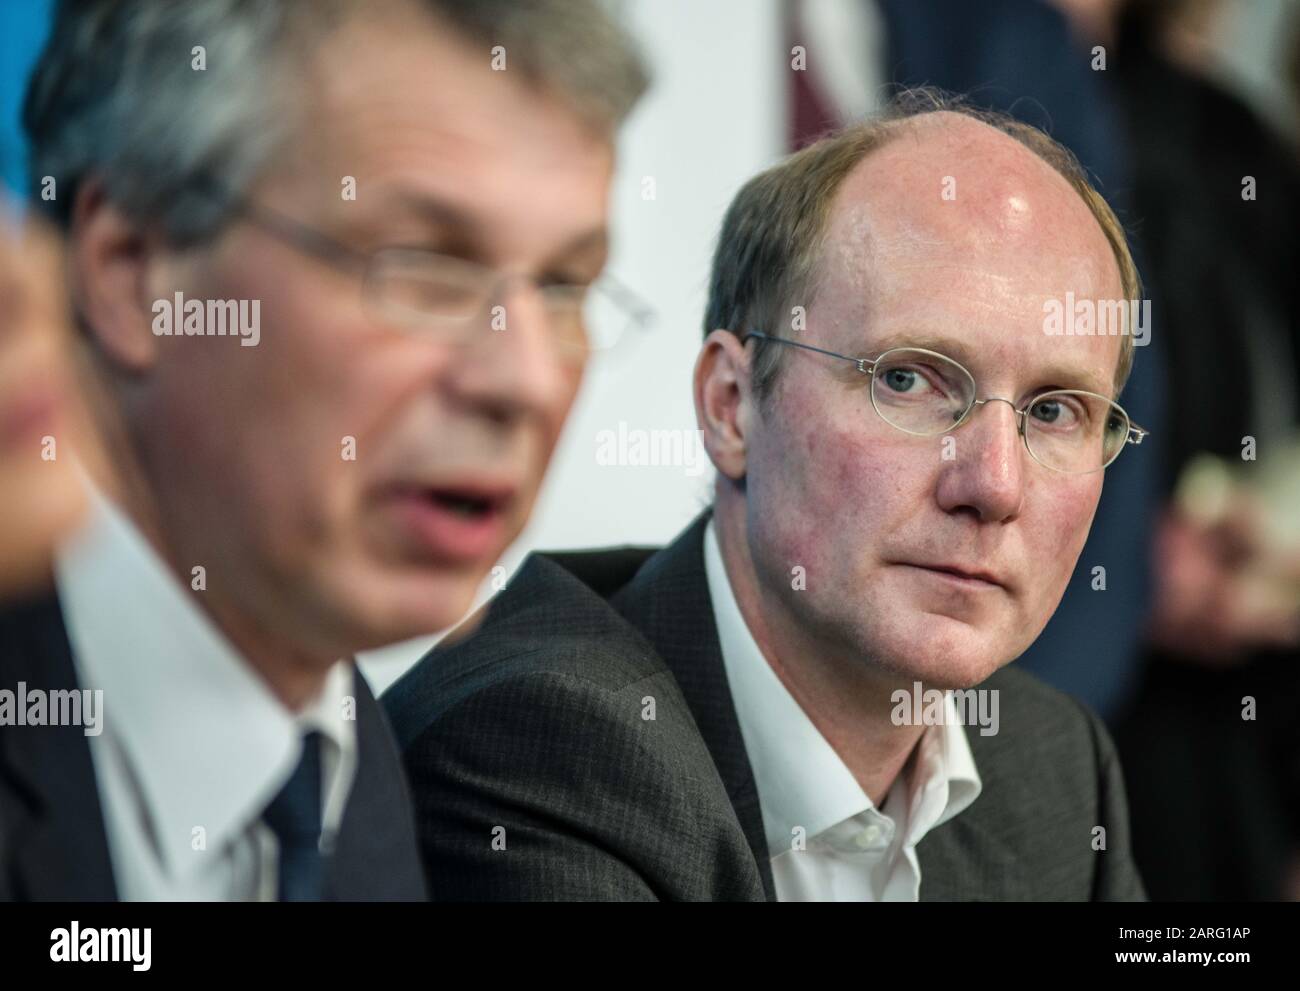 Munich, Bavaria, Germany. 28th Jan, 2020. DR. MARTIN HOCH, head of the Task Force Infektologie (Infection Task Force) of the LGL. In connection with the first confirmed case of Corona Virus in Germany, the Bavarian Health Ministry (Bayerisches Staatsministerium fuer Gesundheit und Pflege) held a press conference to discuss the findings. The virus was found in the wealthy Lake Starnberg area, just outside of western Munich, which is also connected to the citiy via its S-Bahn network. The affected is a 33 year old from Landsberg, who works at a firm in Starnberg recently had contact with a Ch Stock Photo